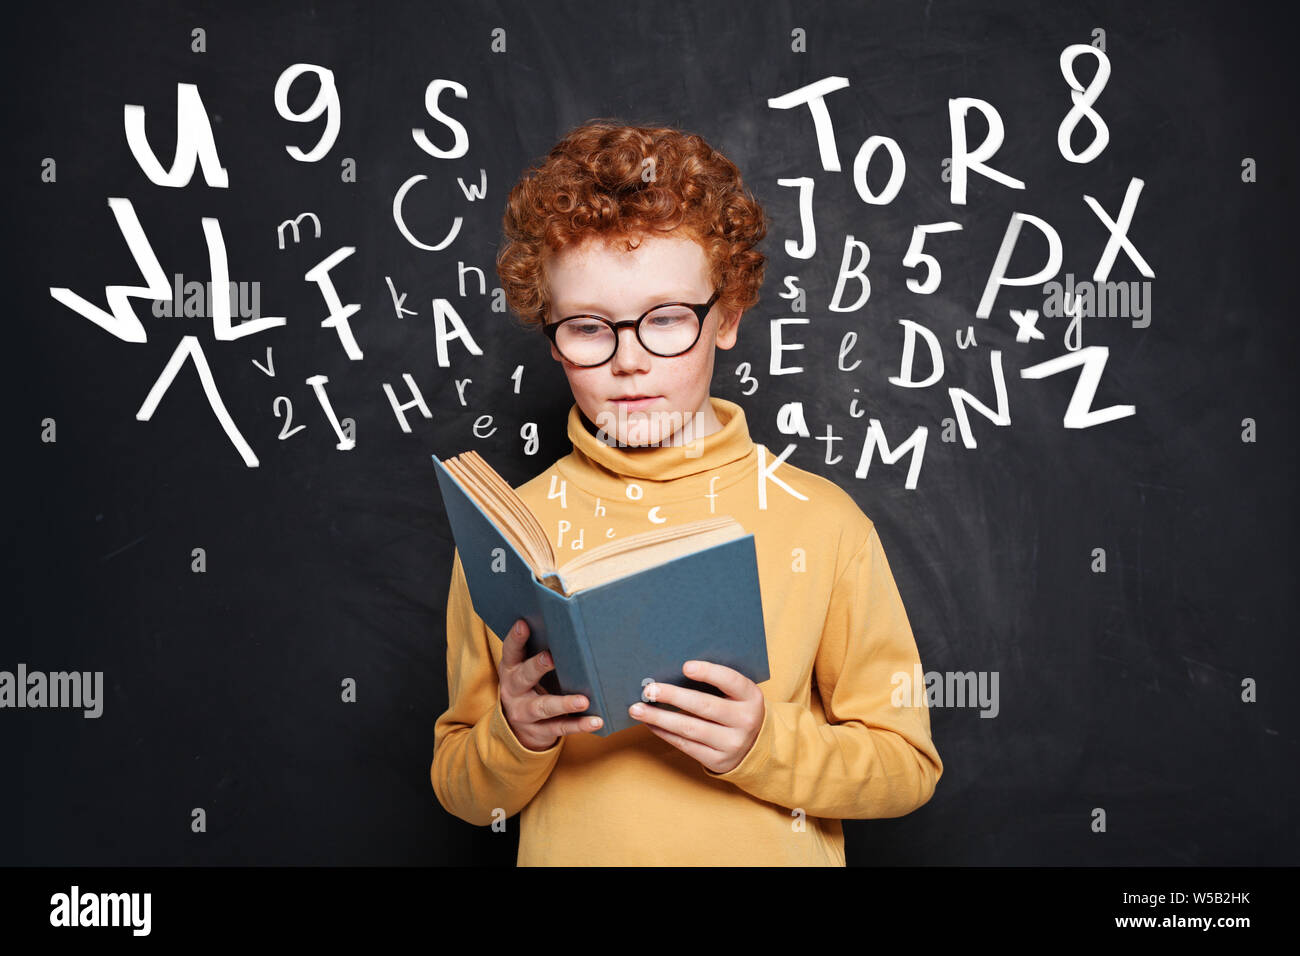 Curious little boy in glasses reading a book against chalkboard Stock Photo